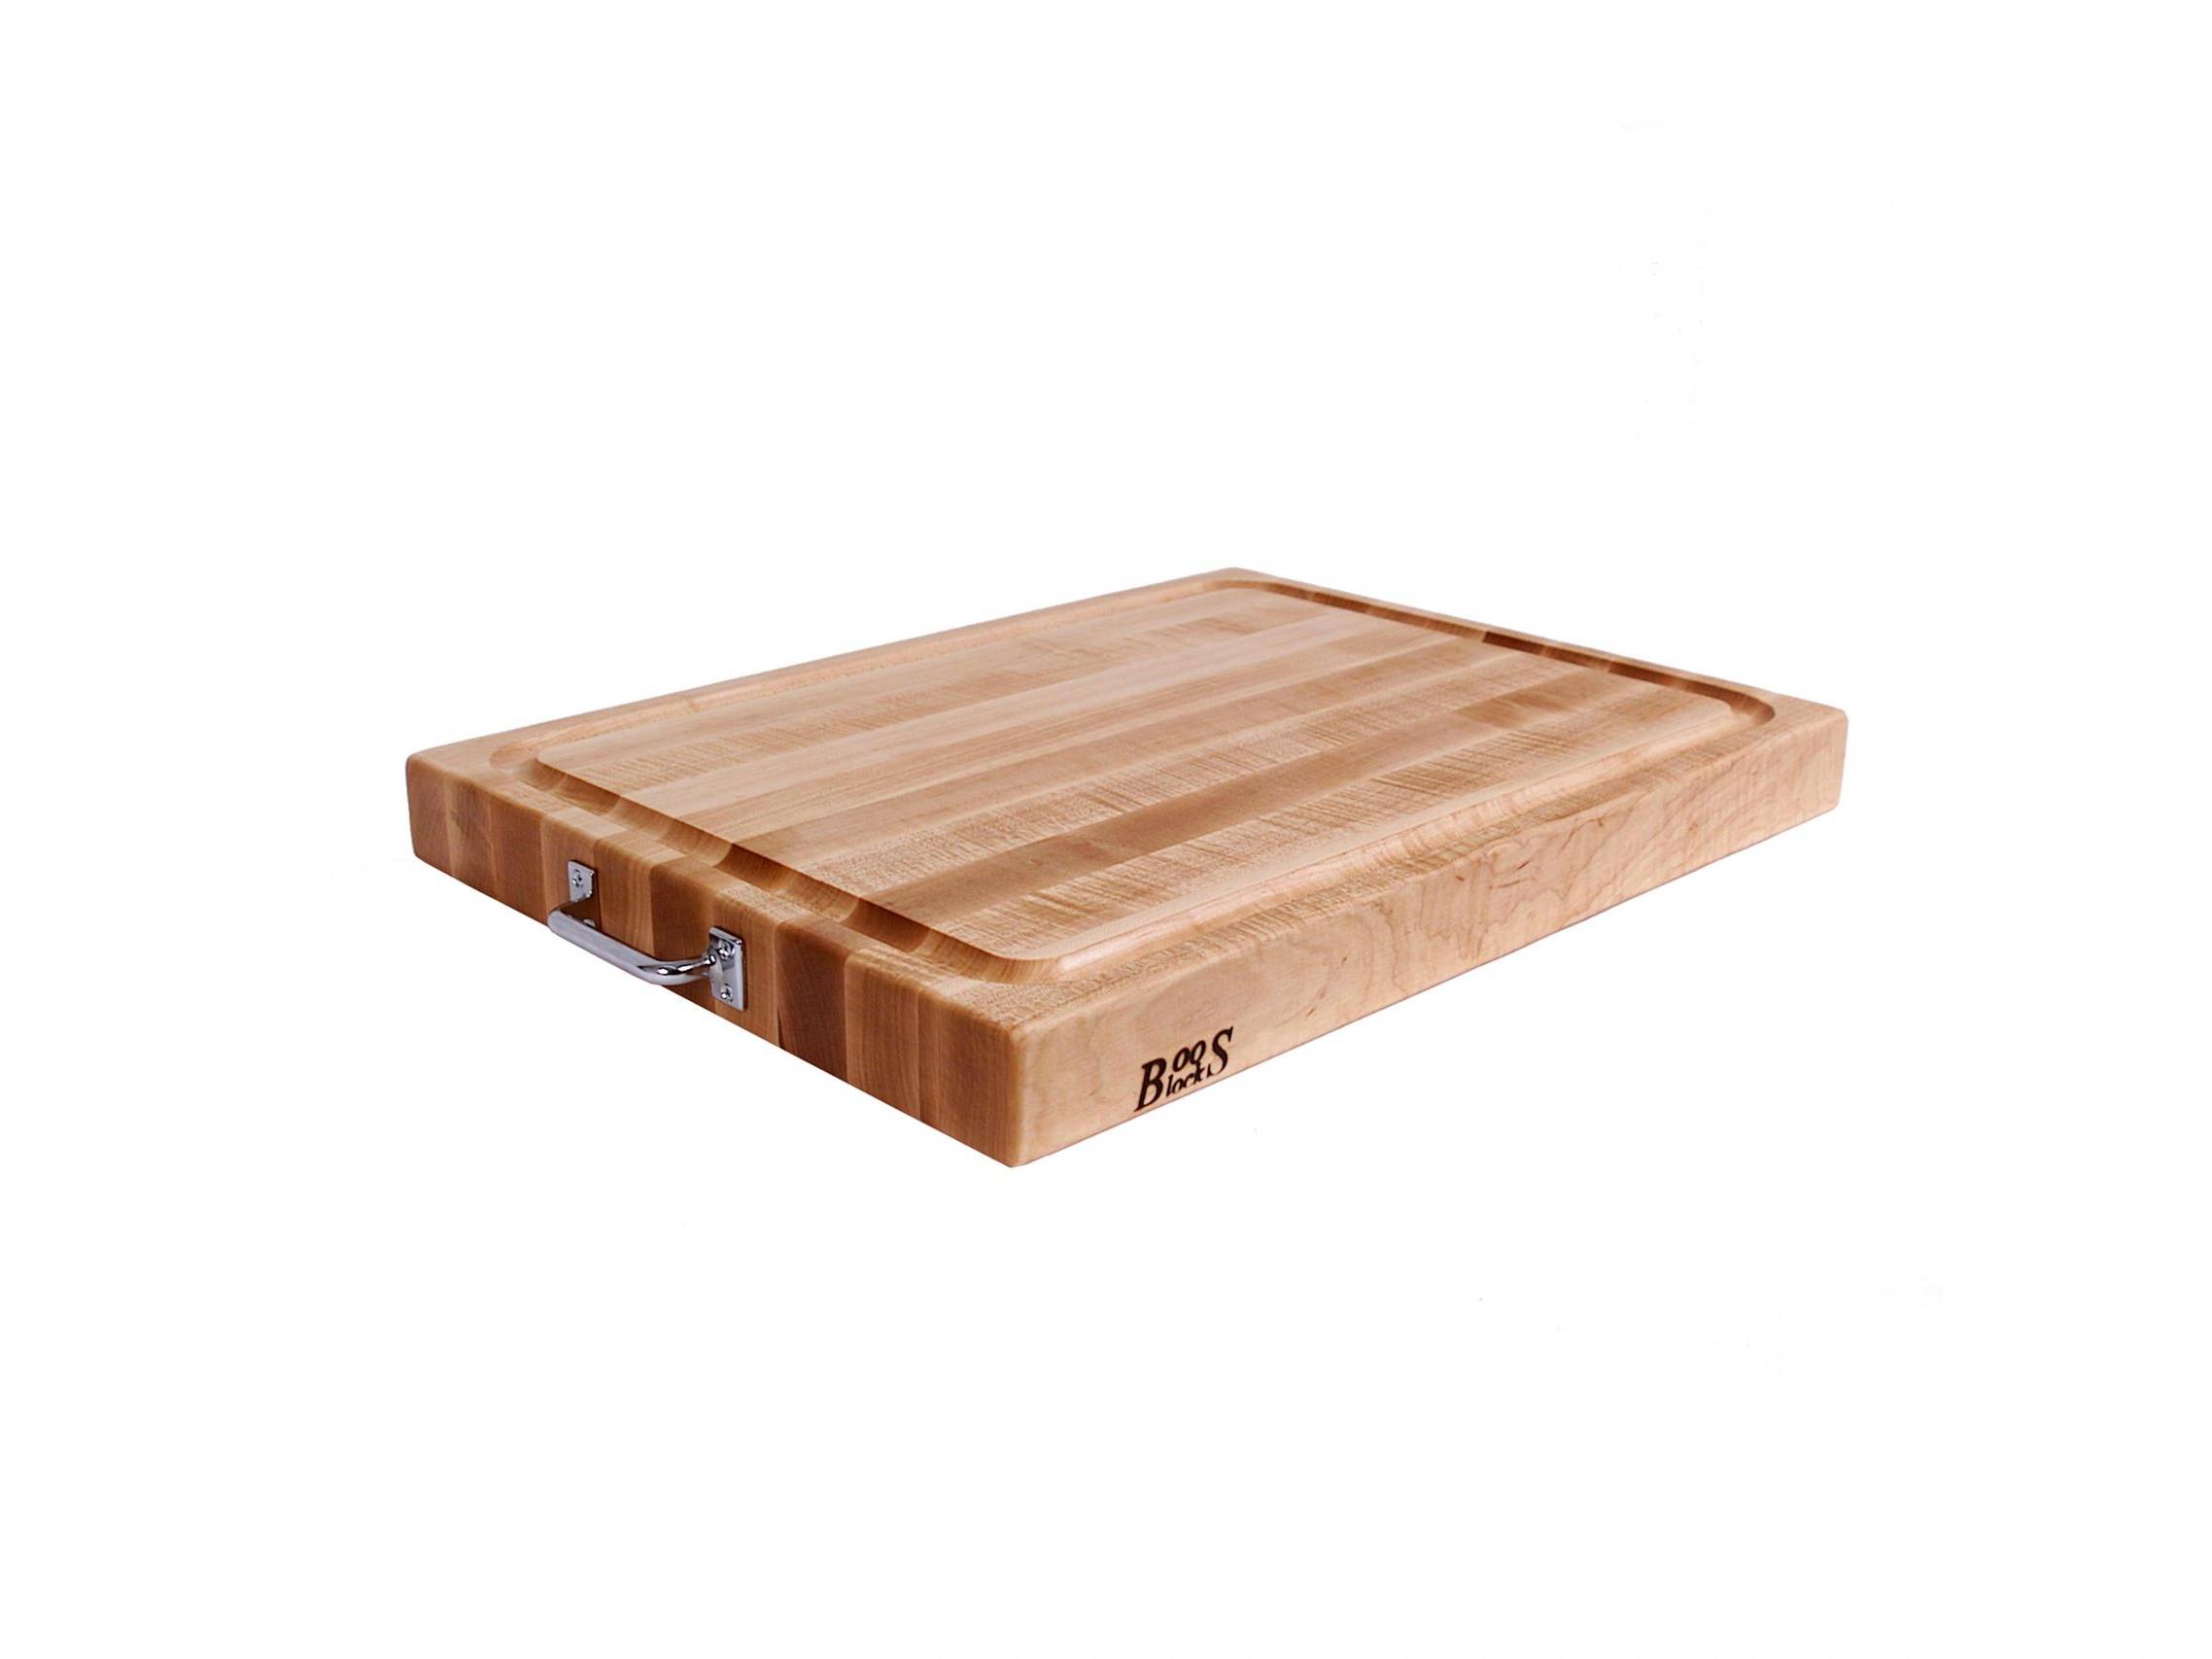 Prep-N-Serve Hard Maple Cutting Board with Juice Groove, Stainless Steel Handles; Can Be Used on Both Sides 53